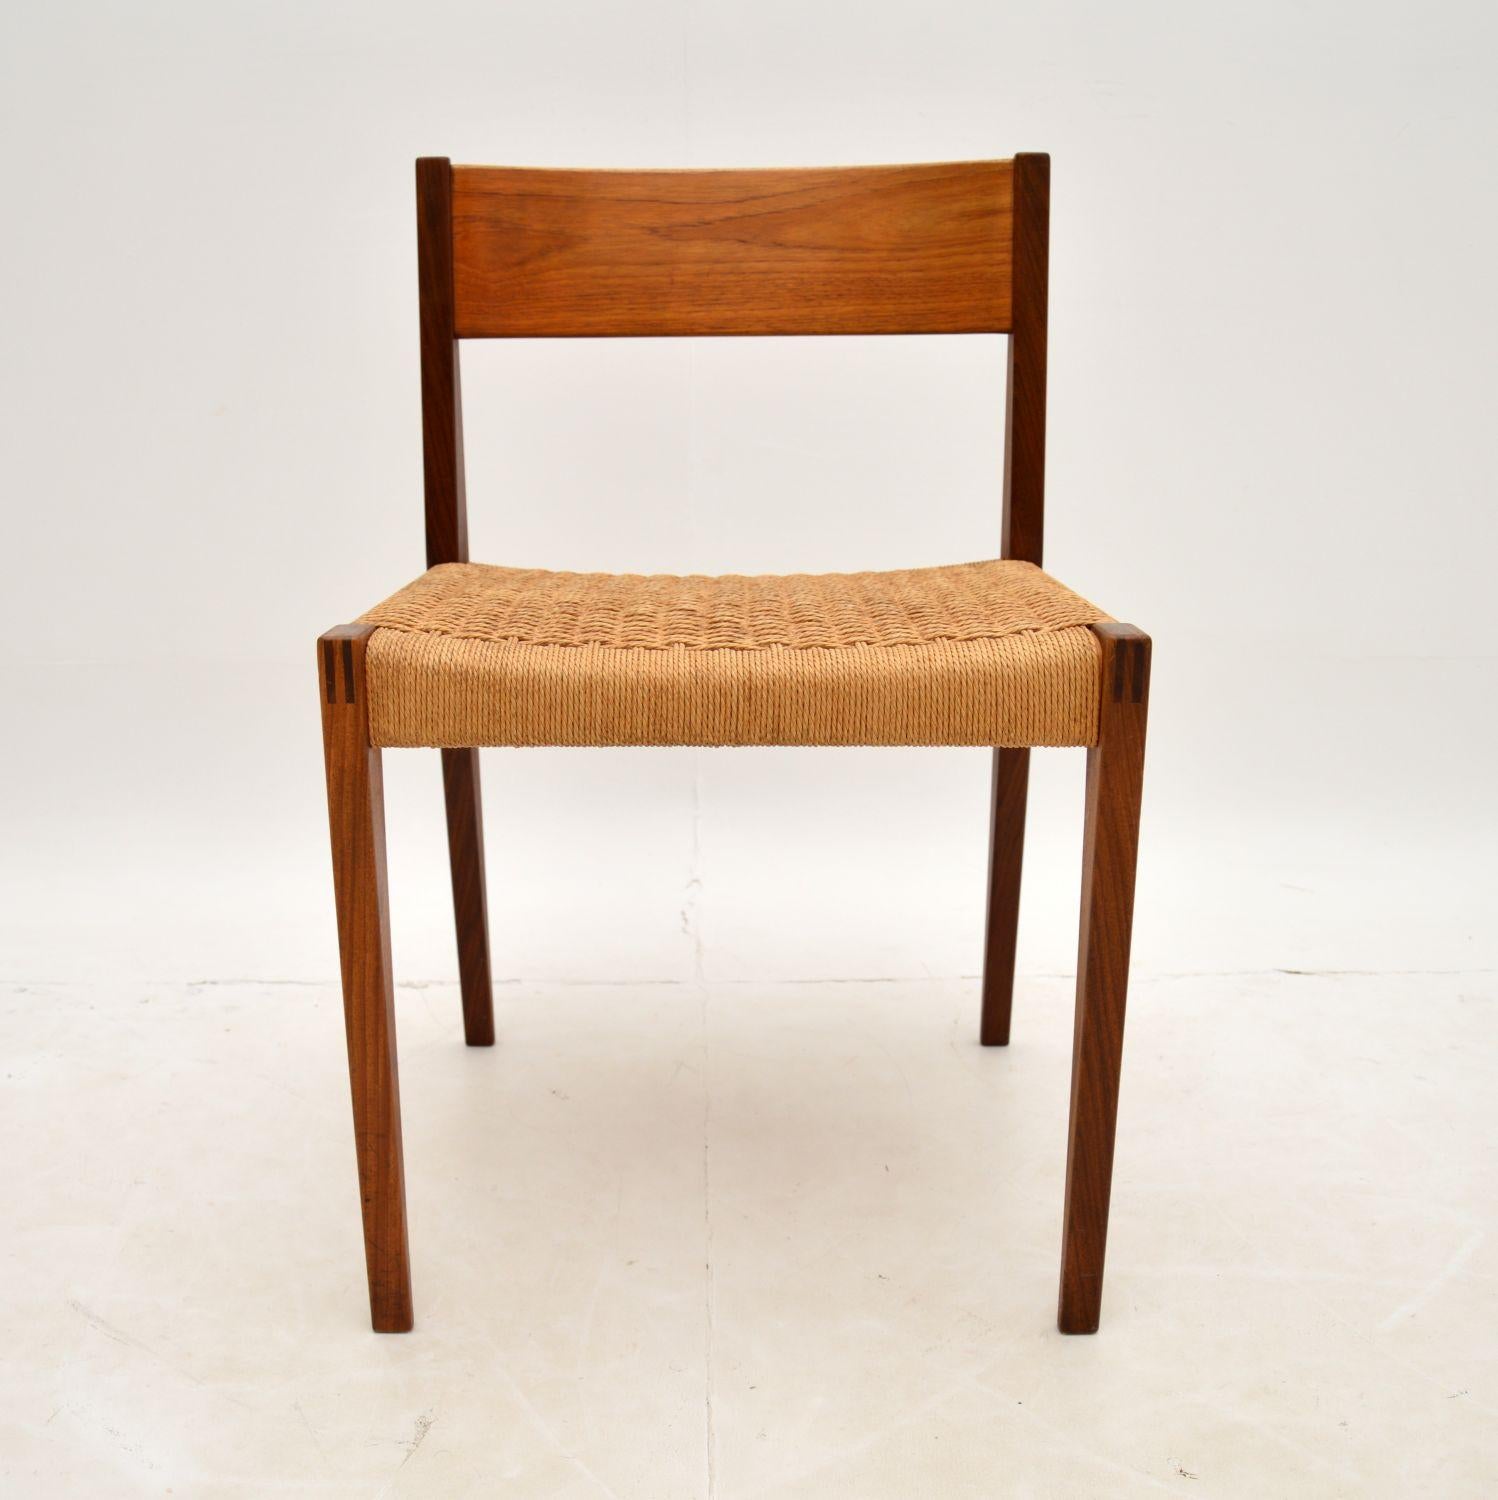 A stylish and iconic vintage Danish chair in Teak. This was designed by Poul Cadovious, it was made in Denmark and dates from the 1960’s.

This is beautifully made and is in great condition for its age. There is just some very light wear here and